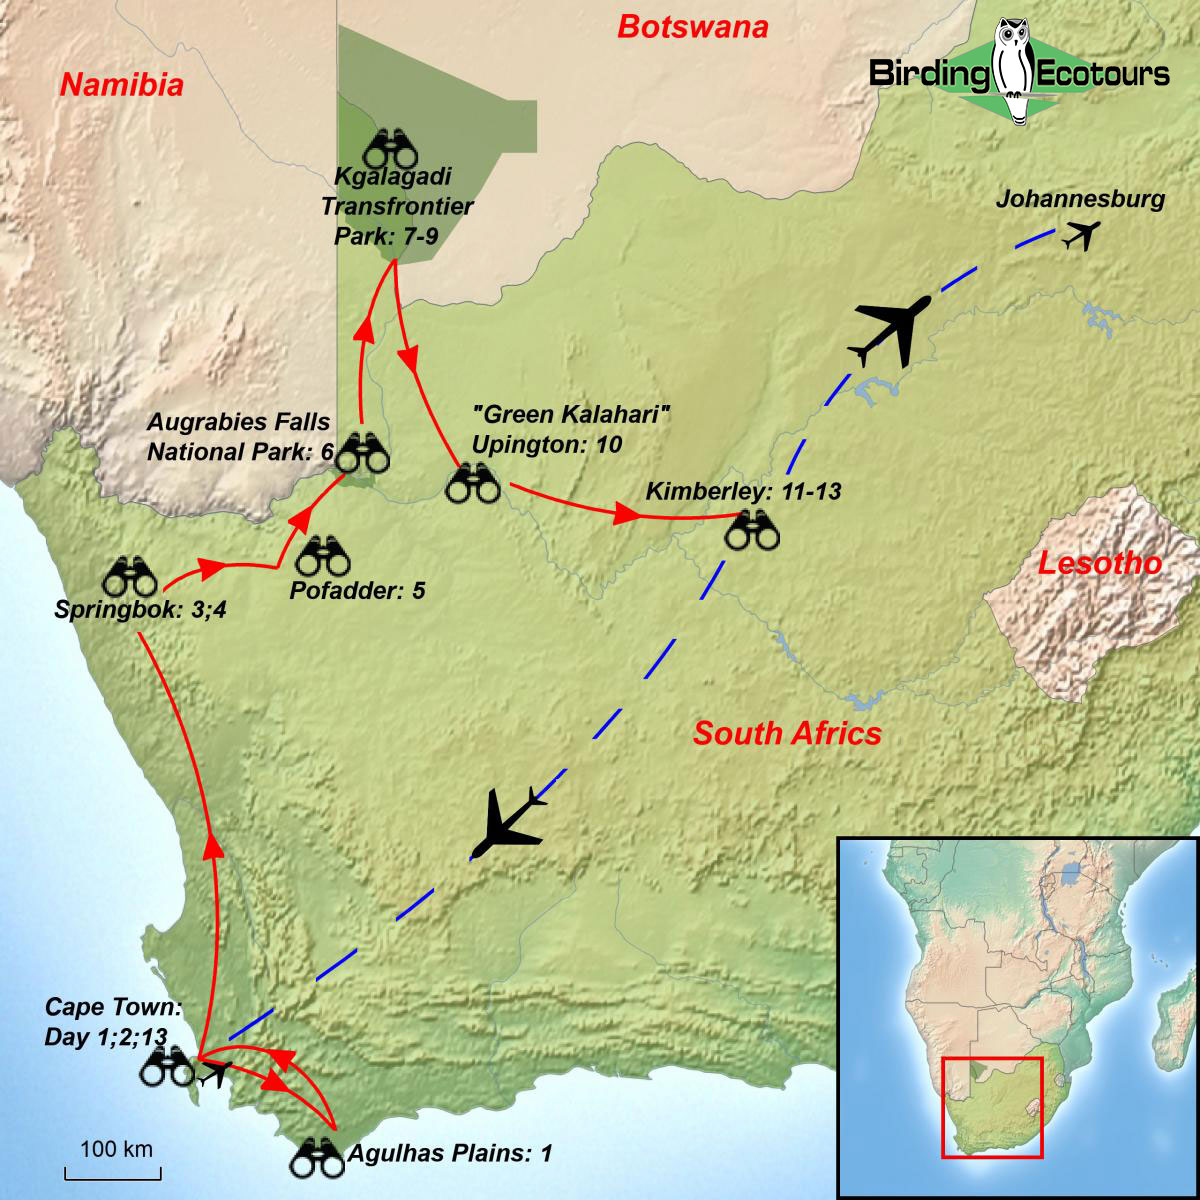 Map of birding tour in Western South Africa: Cape Endemics, Namaqualand Wildflowers & the Kalahari August 2023